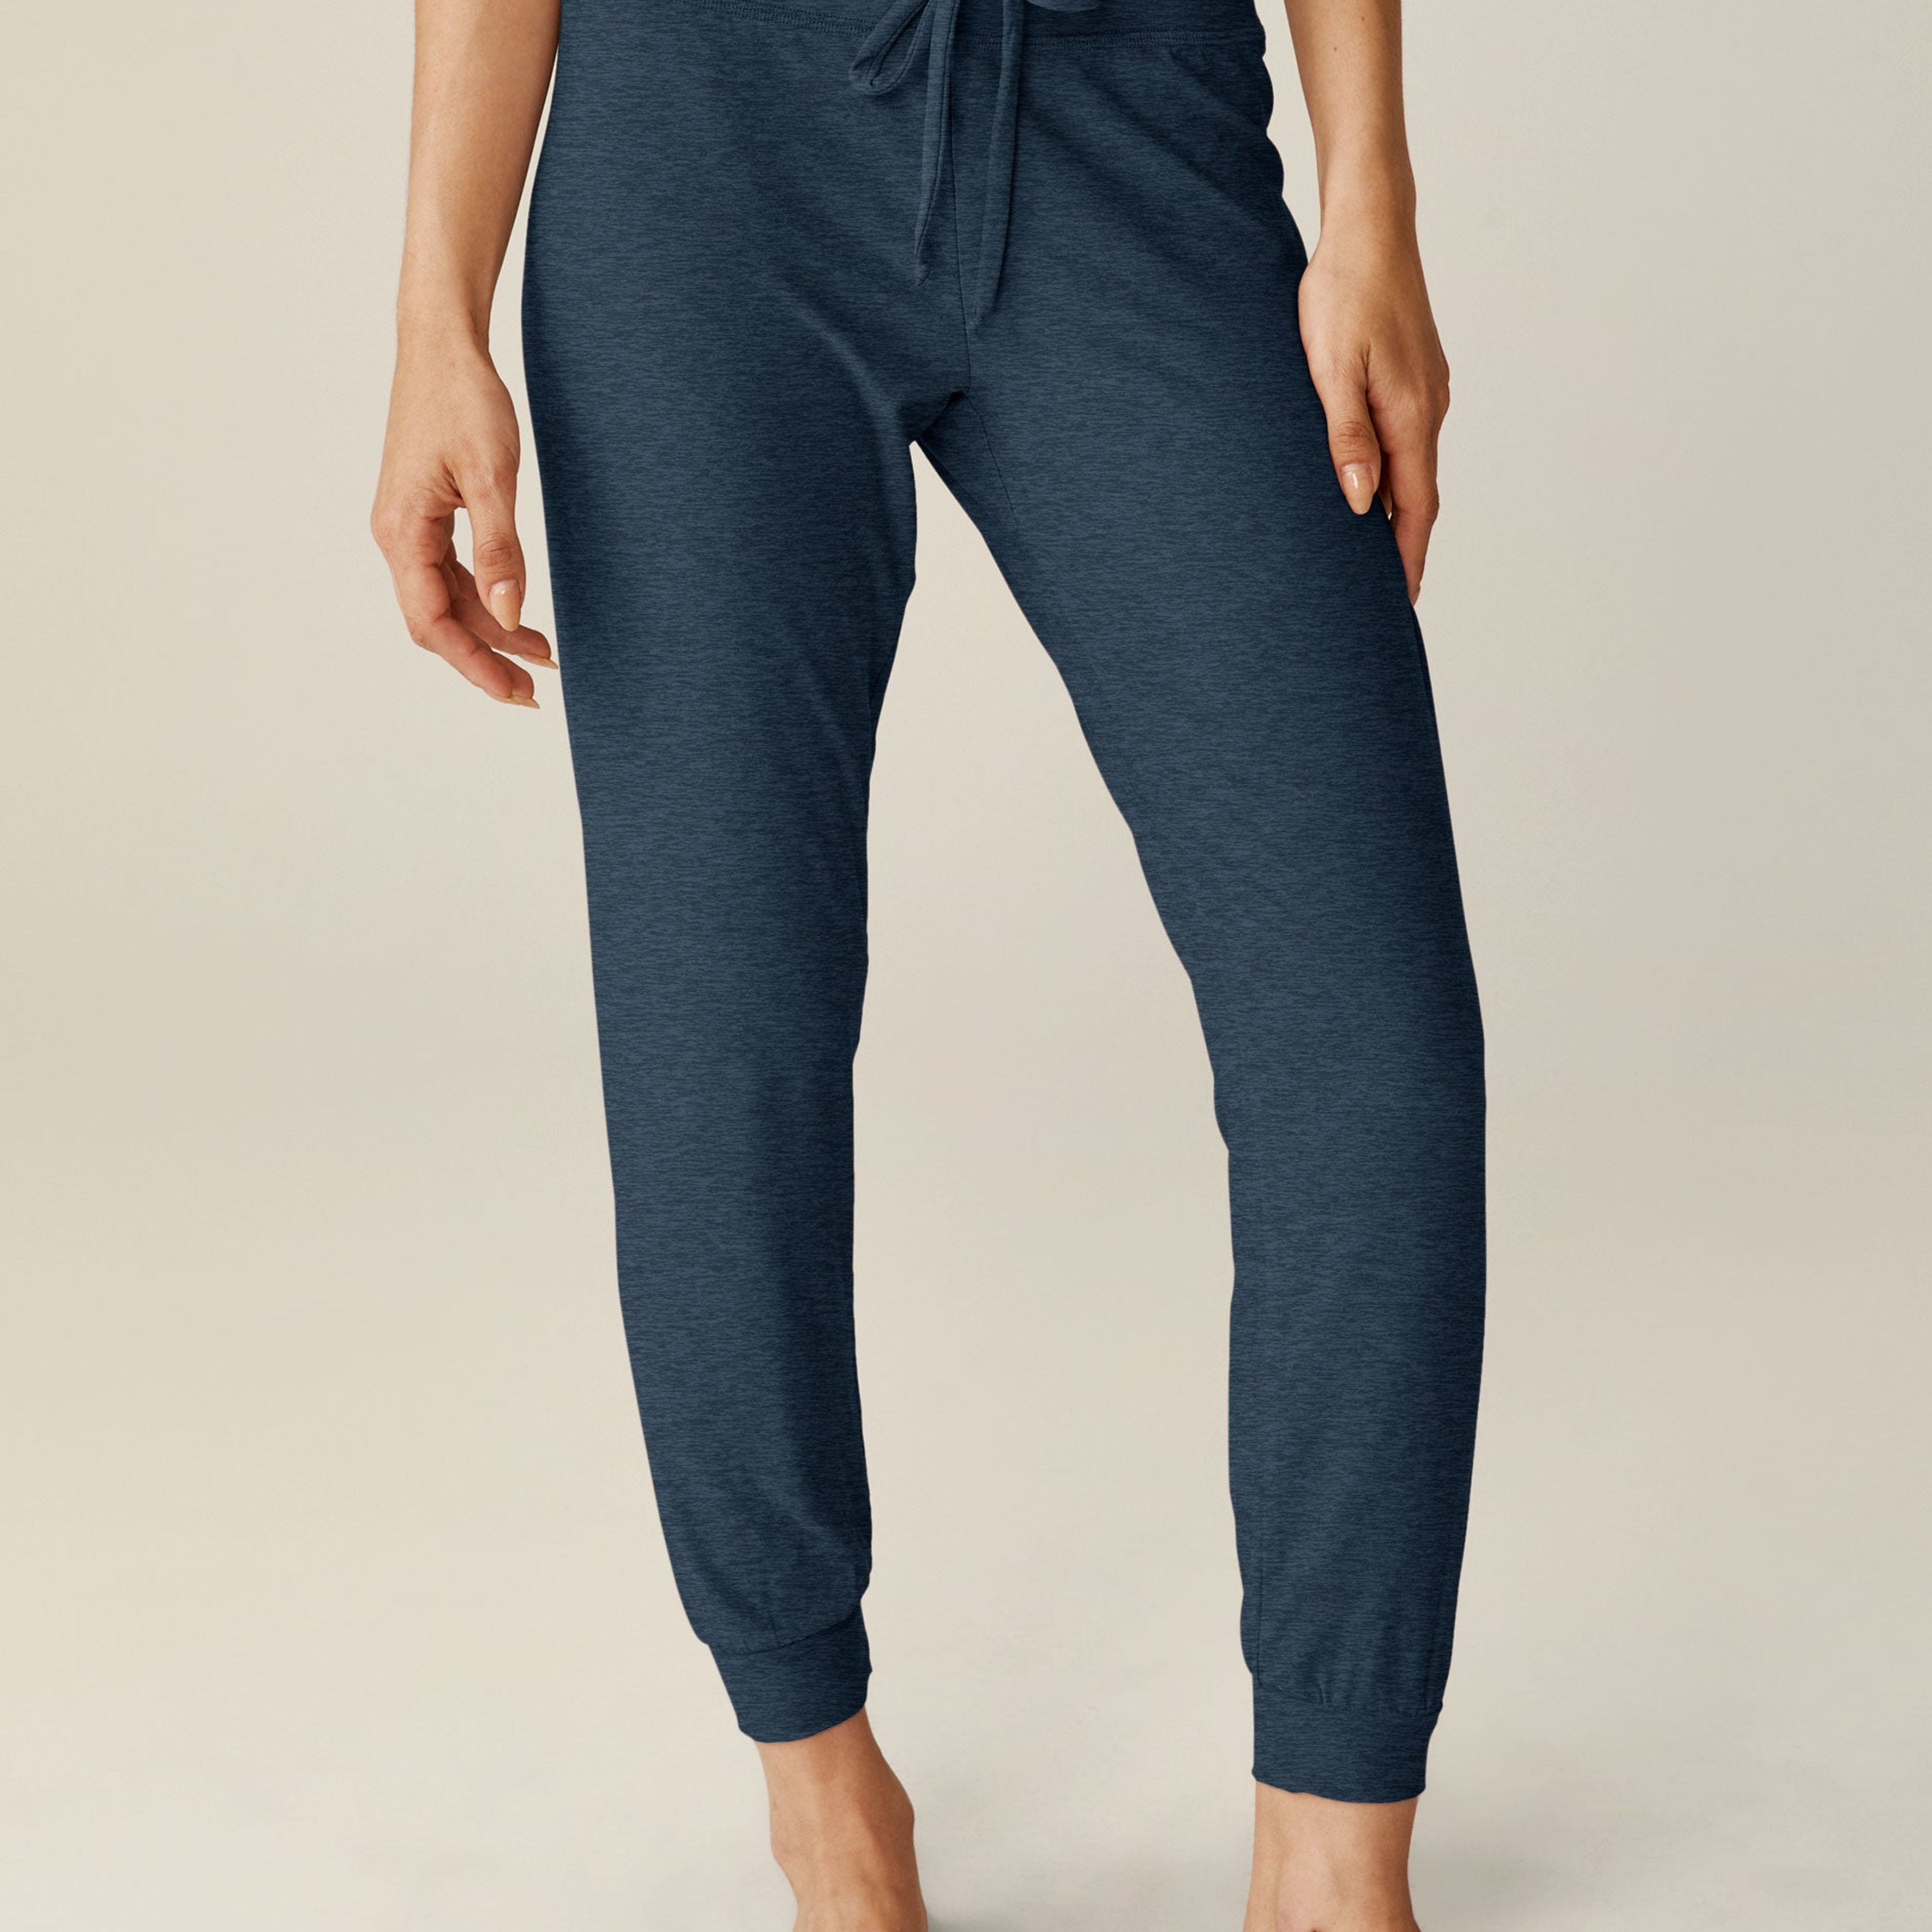 https://cdn.prod.marmalade.co/products/3840x3840/filters:quality(80)/www.beyondyoga.com%2Fproducts%2Ffeatherweight-lounge-around-midi-jogger-nocturnal-navy-lwsd1122%2F1698103256%2FLWSD1122_nocturnal-navy_8117.jpg